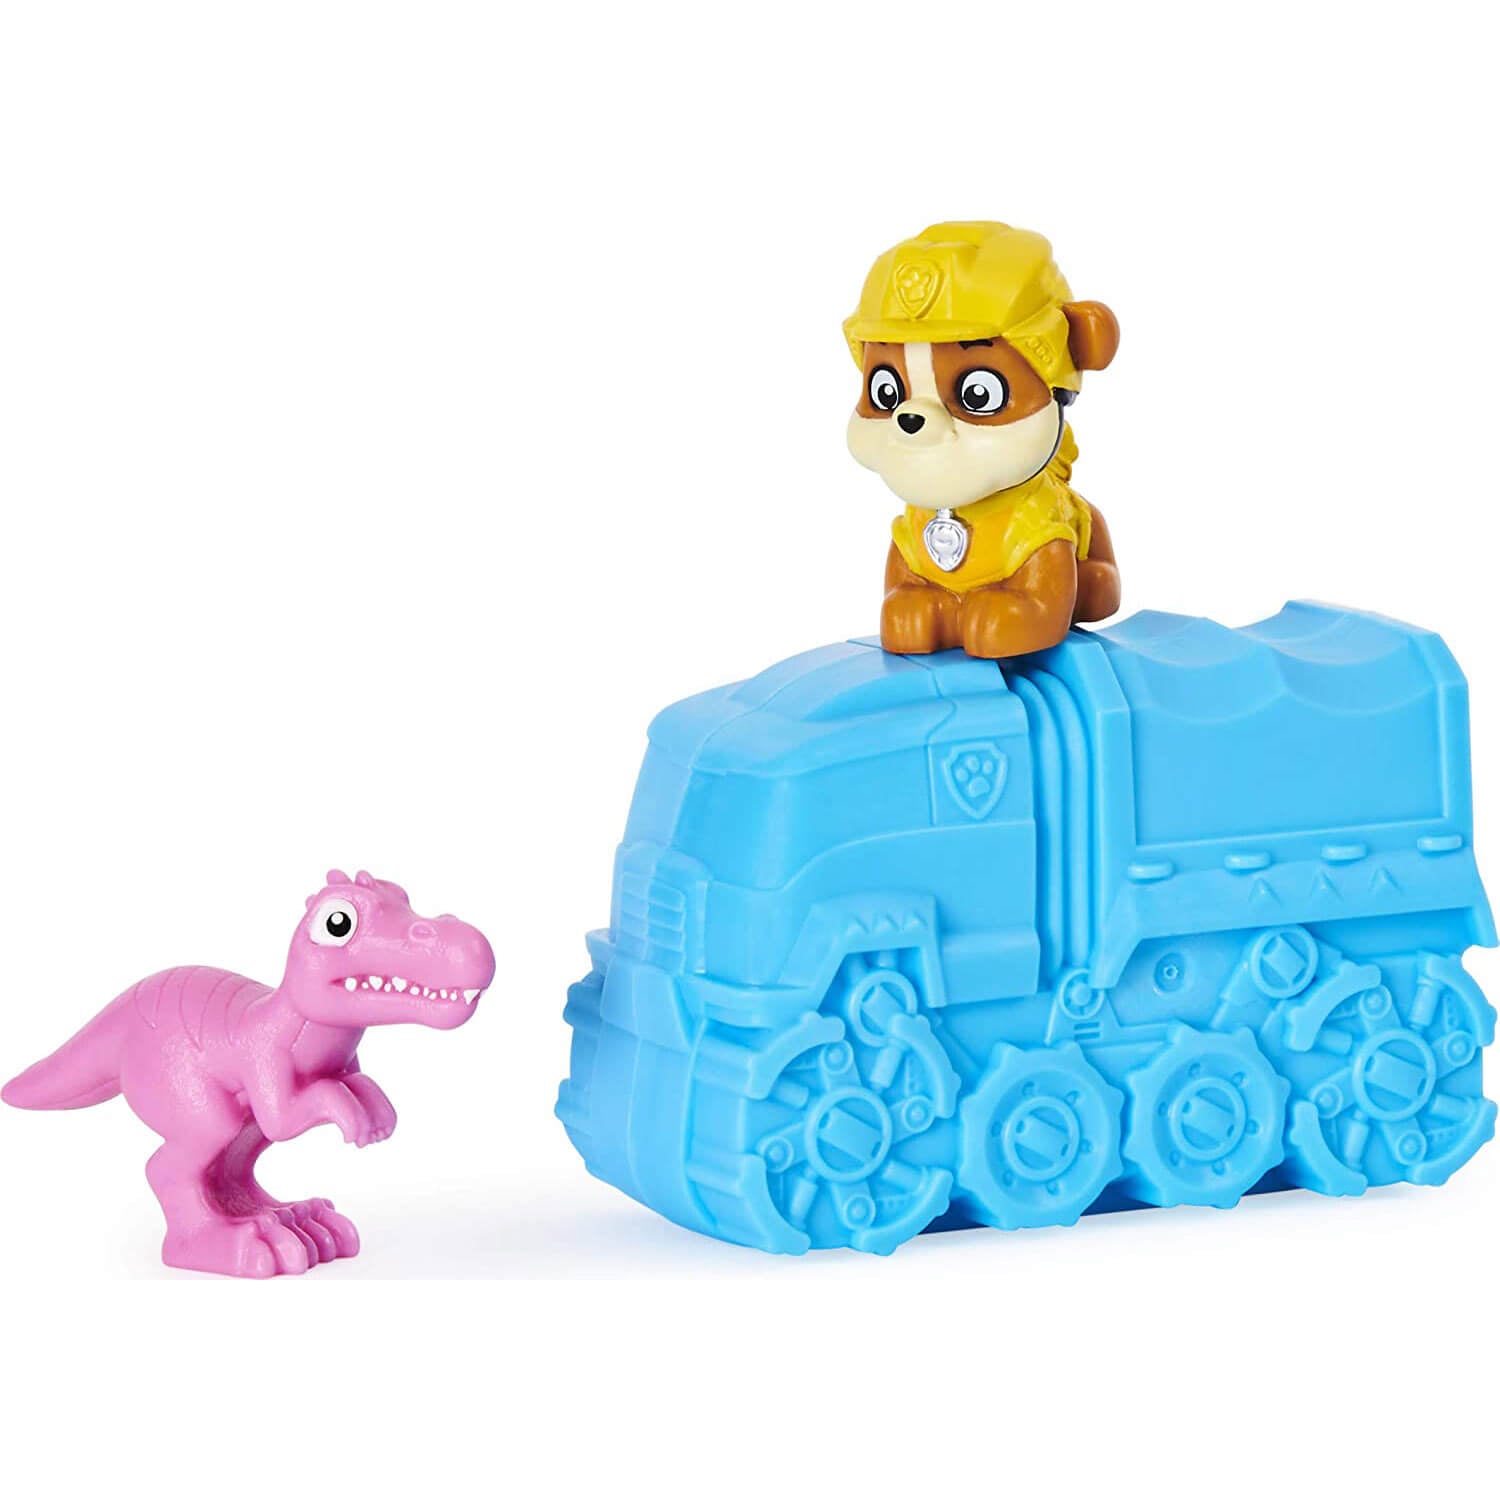 Spin Master PAW Patrol Mini Figures Dino Series 7 (Style May Vary)